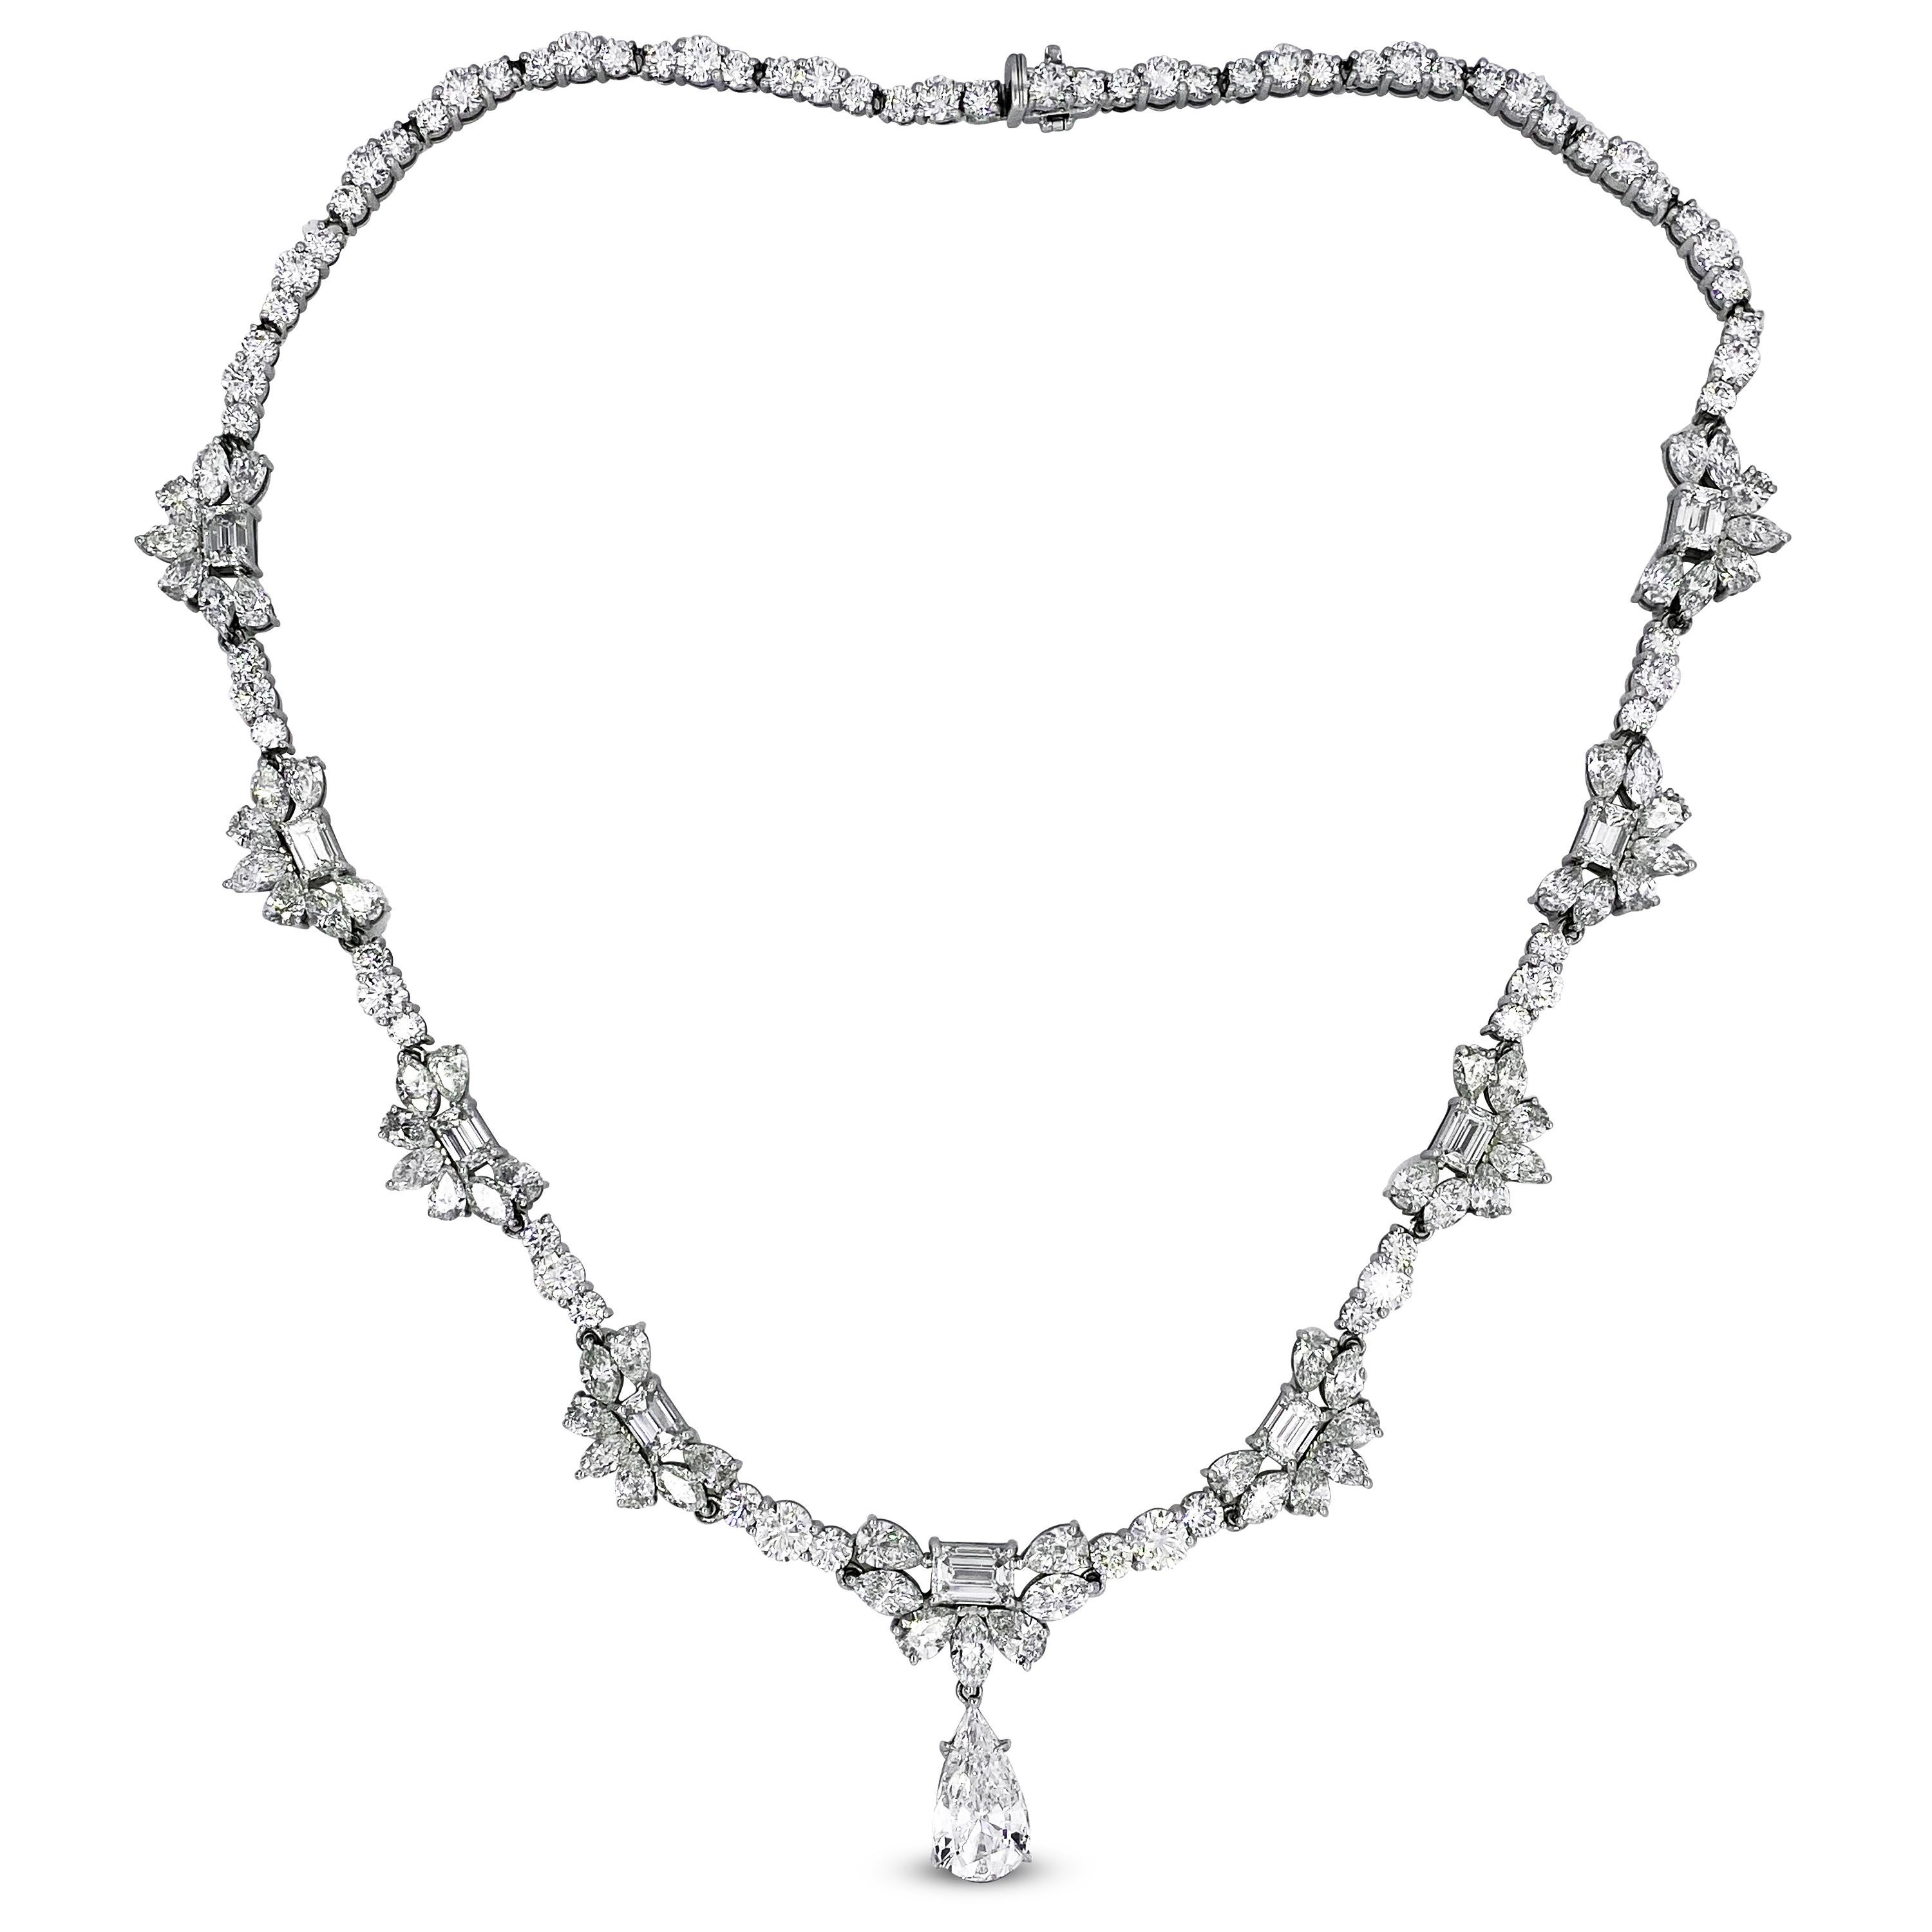 GIA Certified Pear Shape Drop Multi Shape All Diamond Platinum Necklace

This one-of-a-kind necklace is exceptional with 29.50 carat diamonds E-F Color, VVS1-VS1 clarity

Pear Shape Diamond Drop is GIA Certified and Laser Inscribed with Report